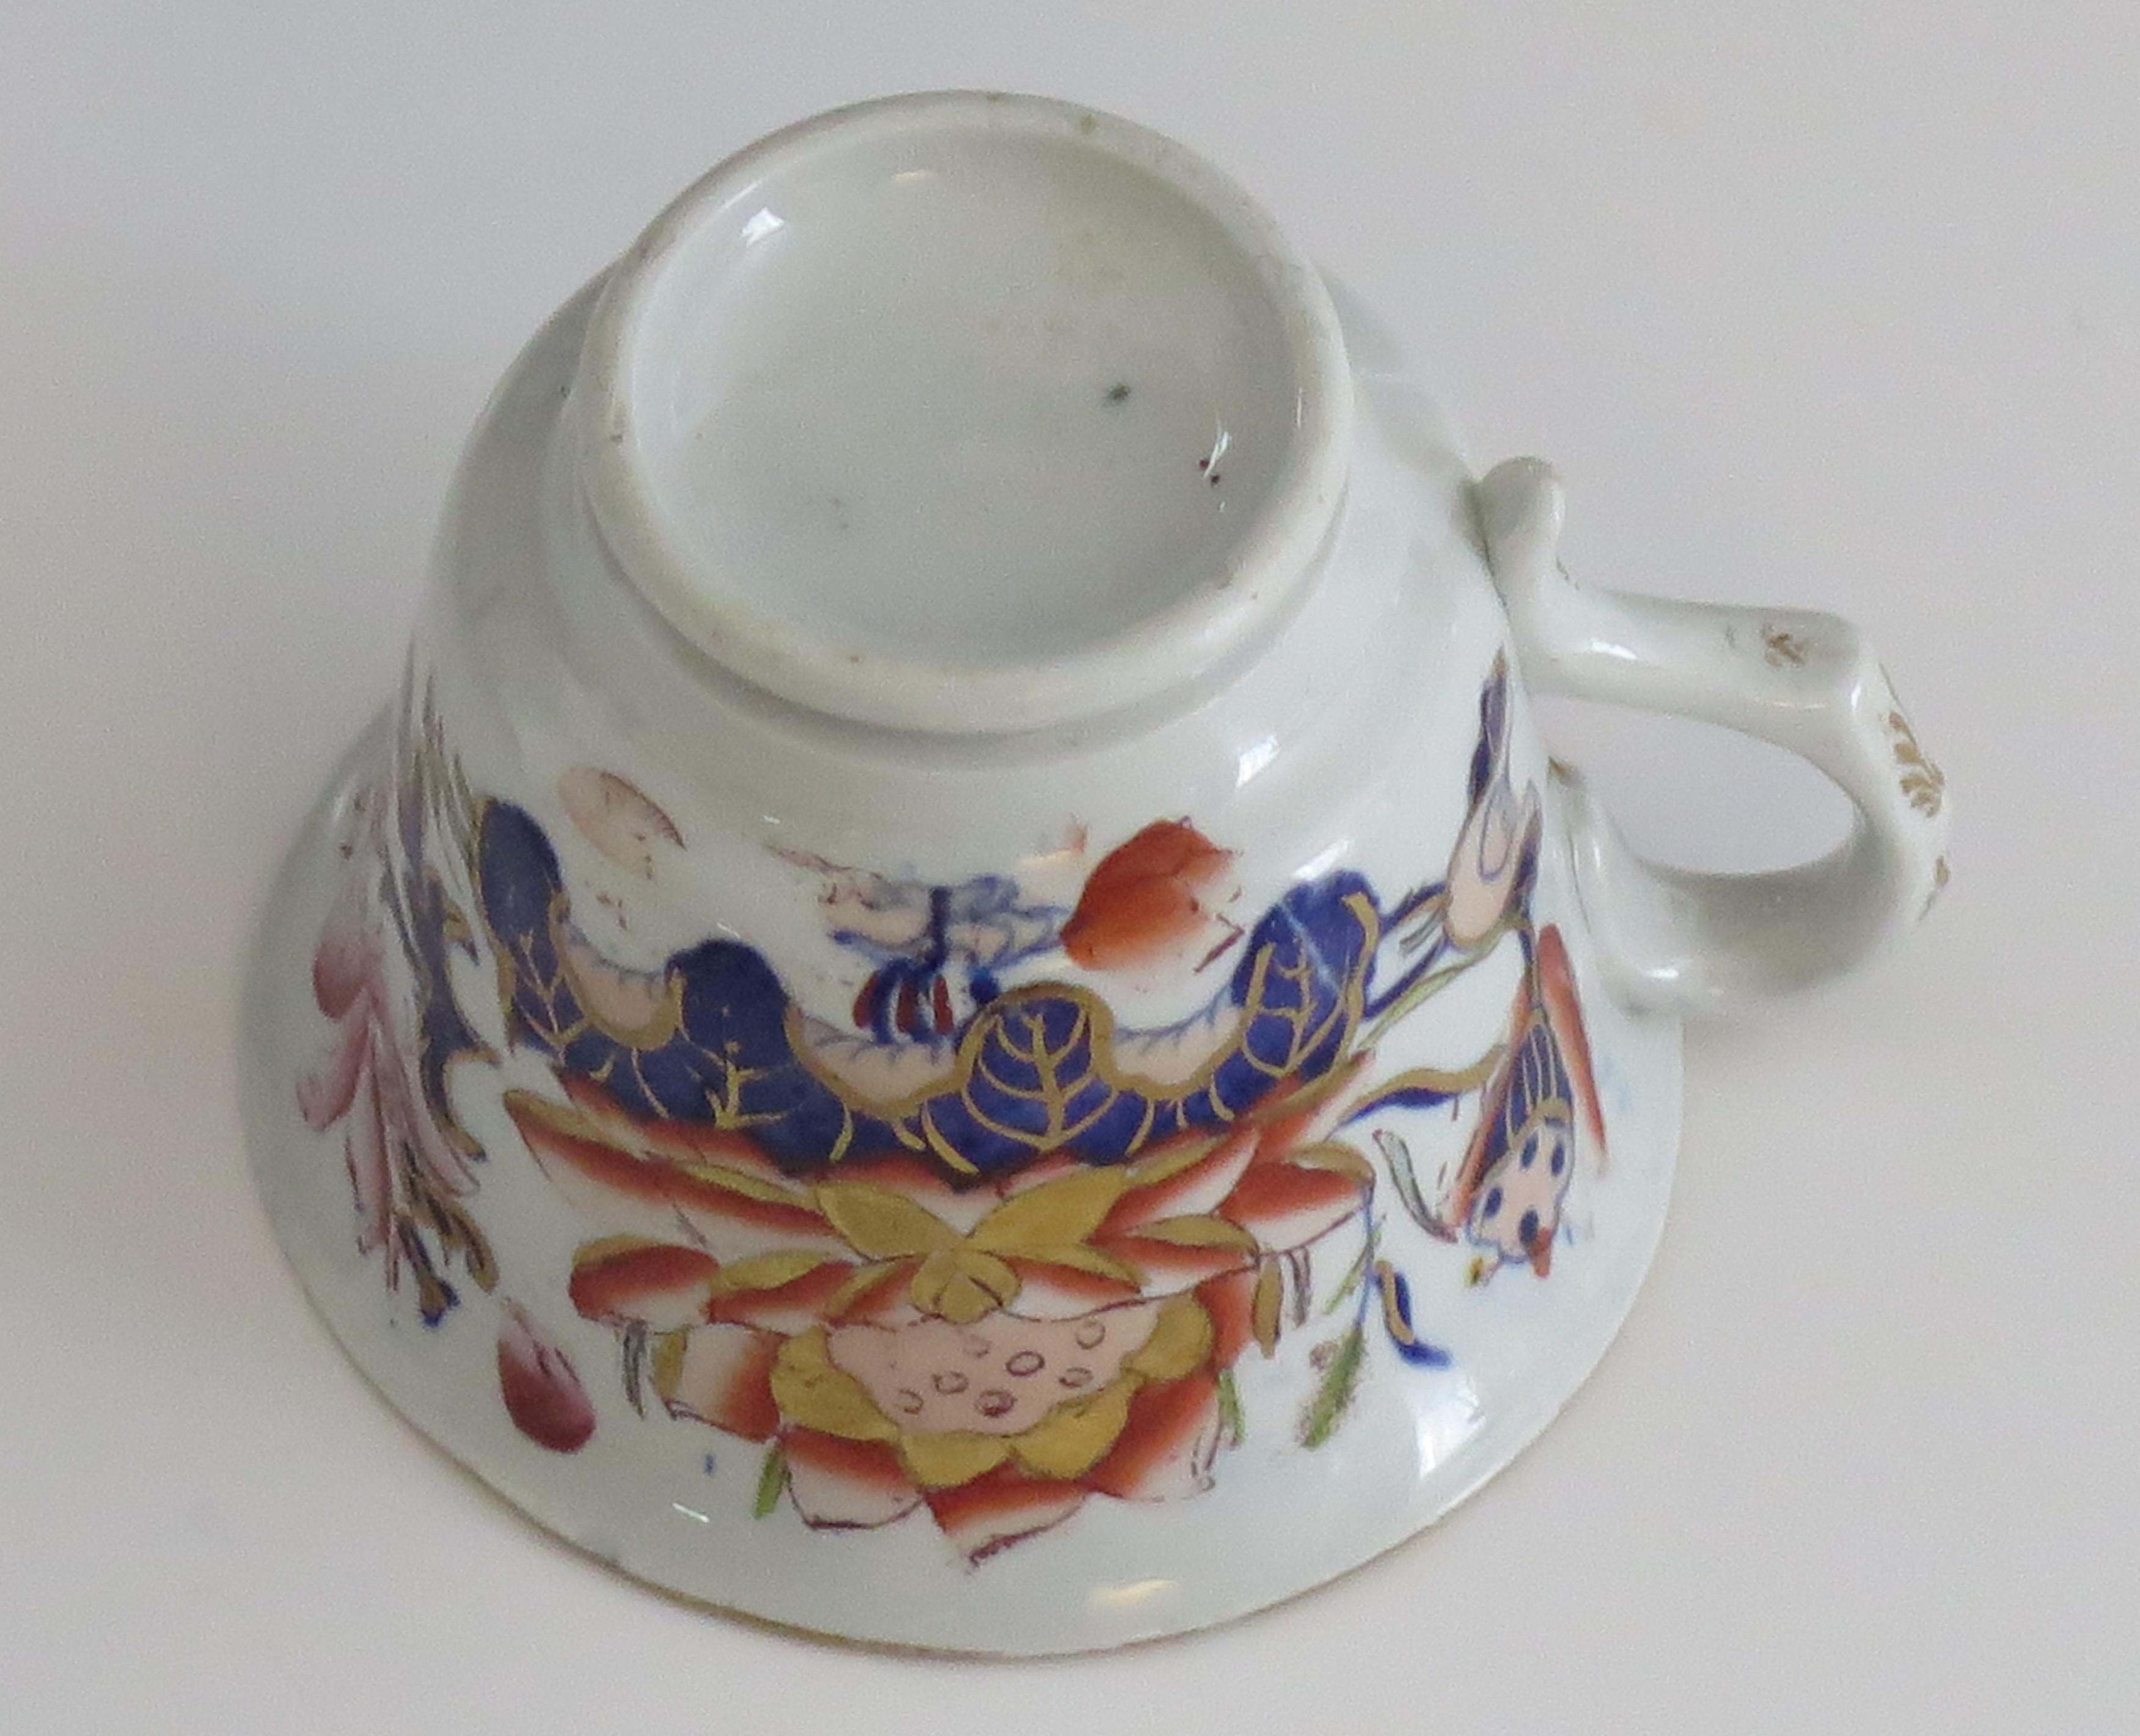 Mason's Ironstone Tea Cup Hand Painted in Gilded Water Lily Pattern, circa 1835 For Sale 4